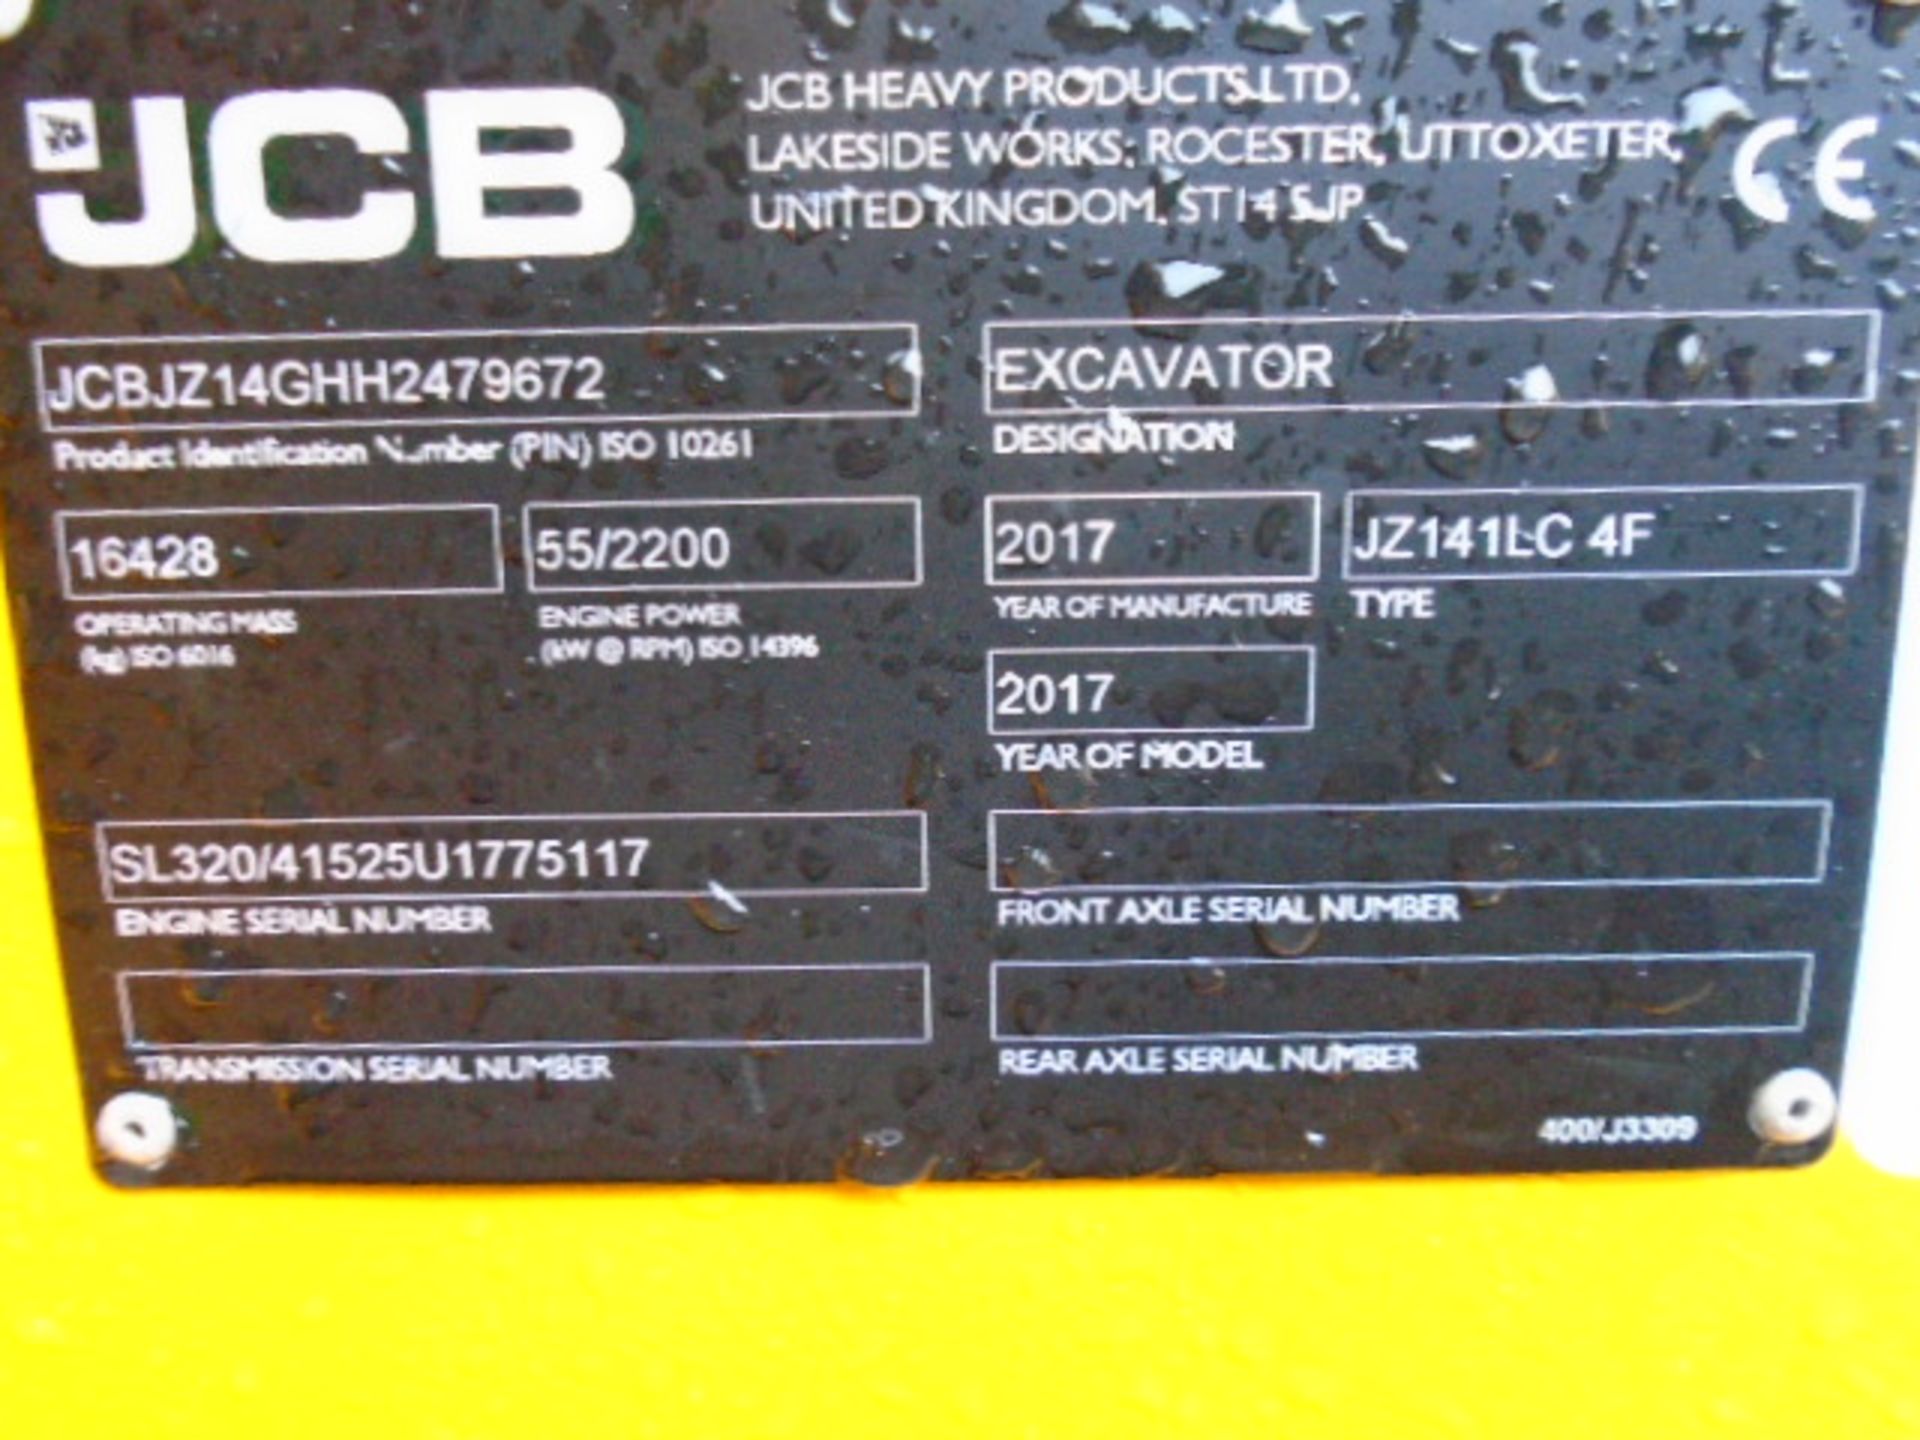 JCB JZ141LC 4F Tracked Excavator, serial no. 24796 - Image 9 of 9